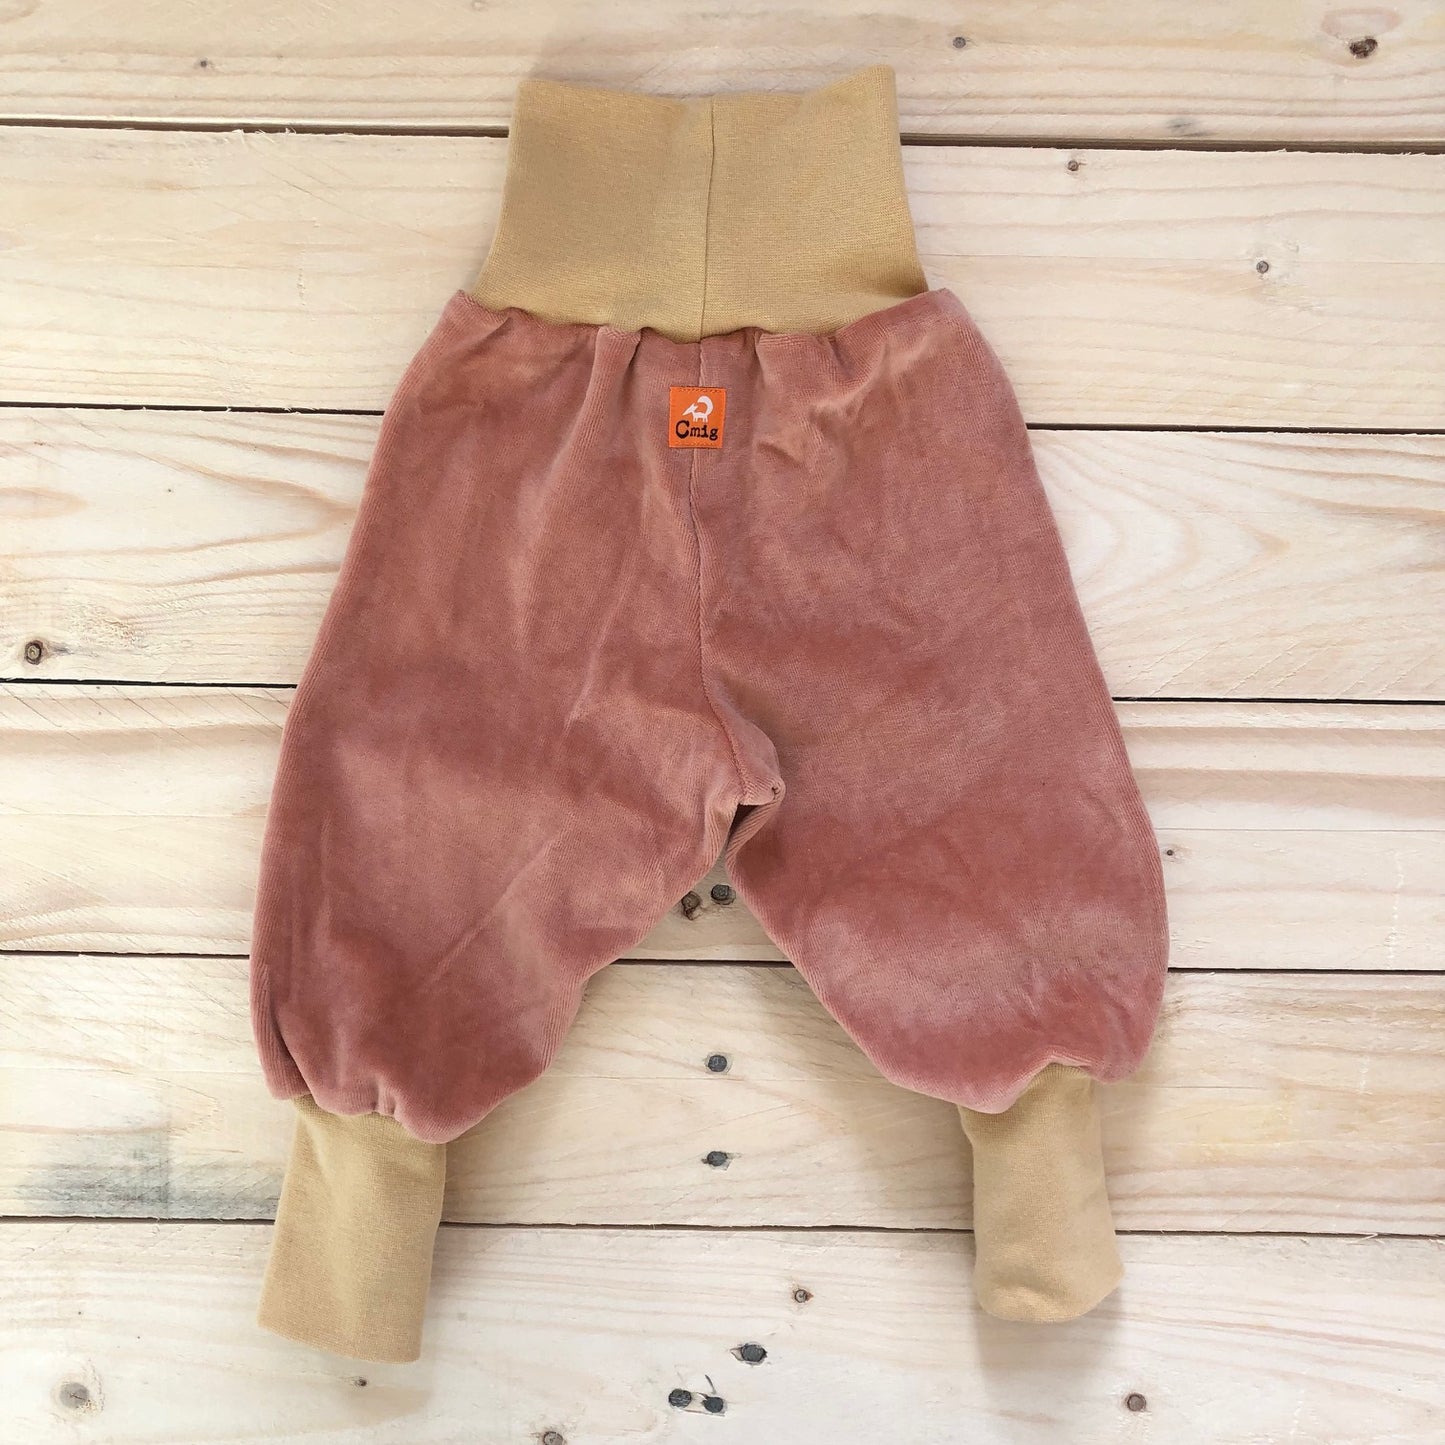 Baby Nickihose in peach bloom / light yellow 56-86